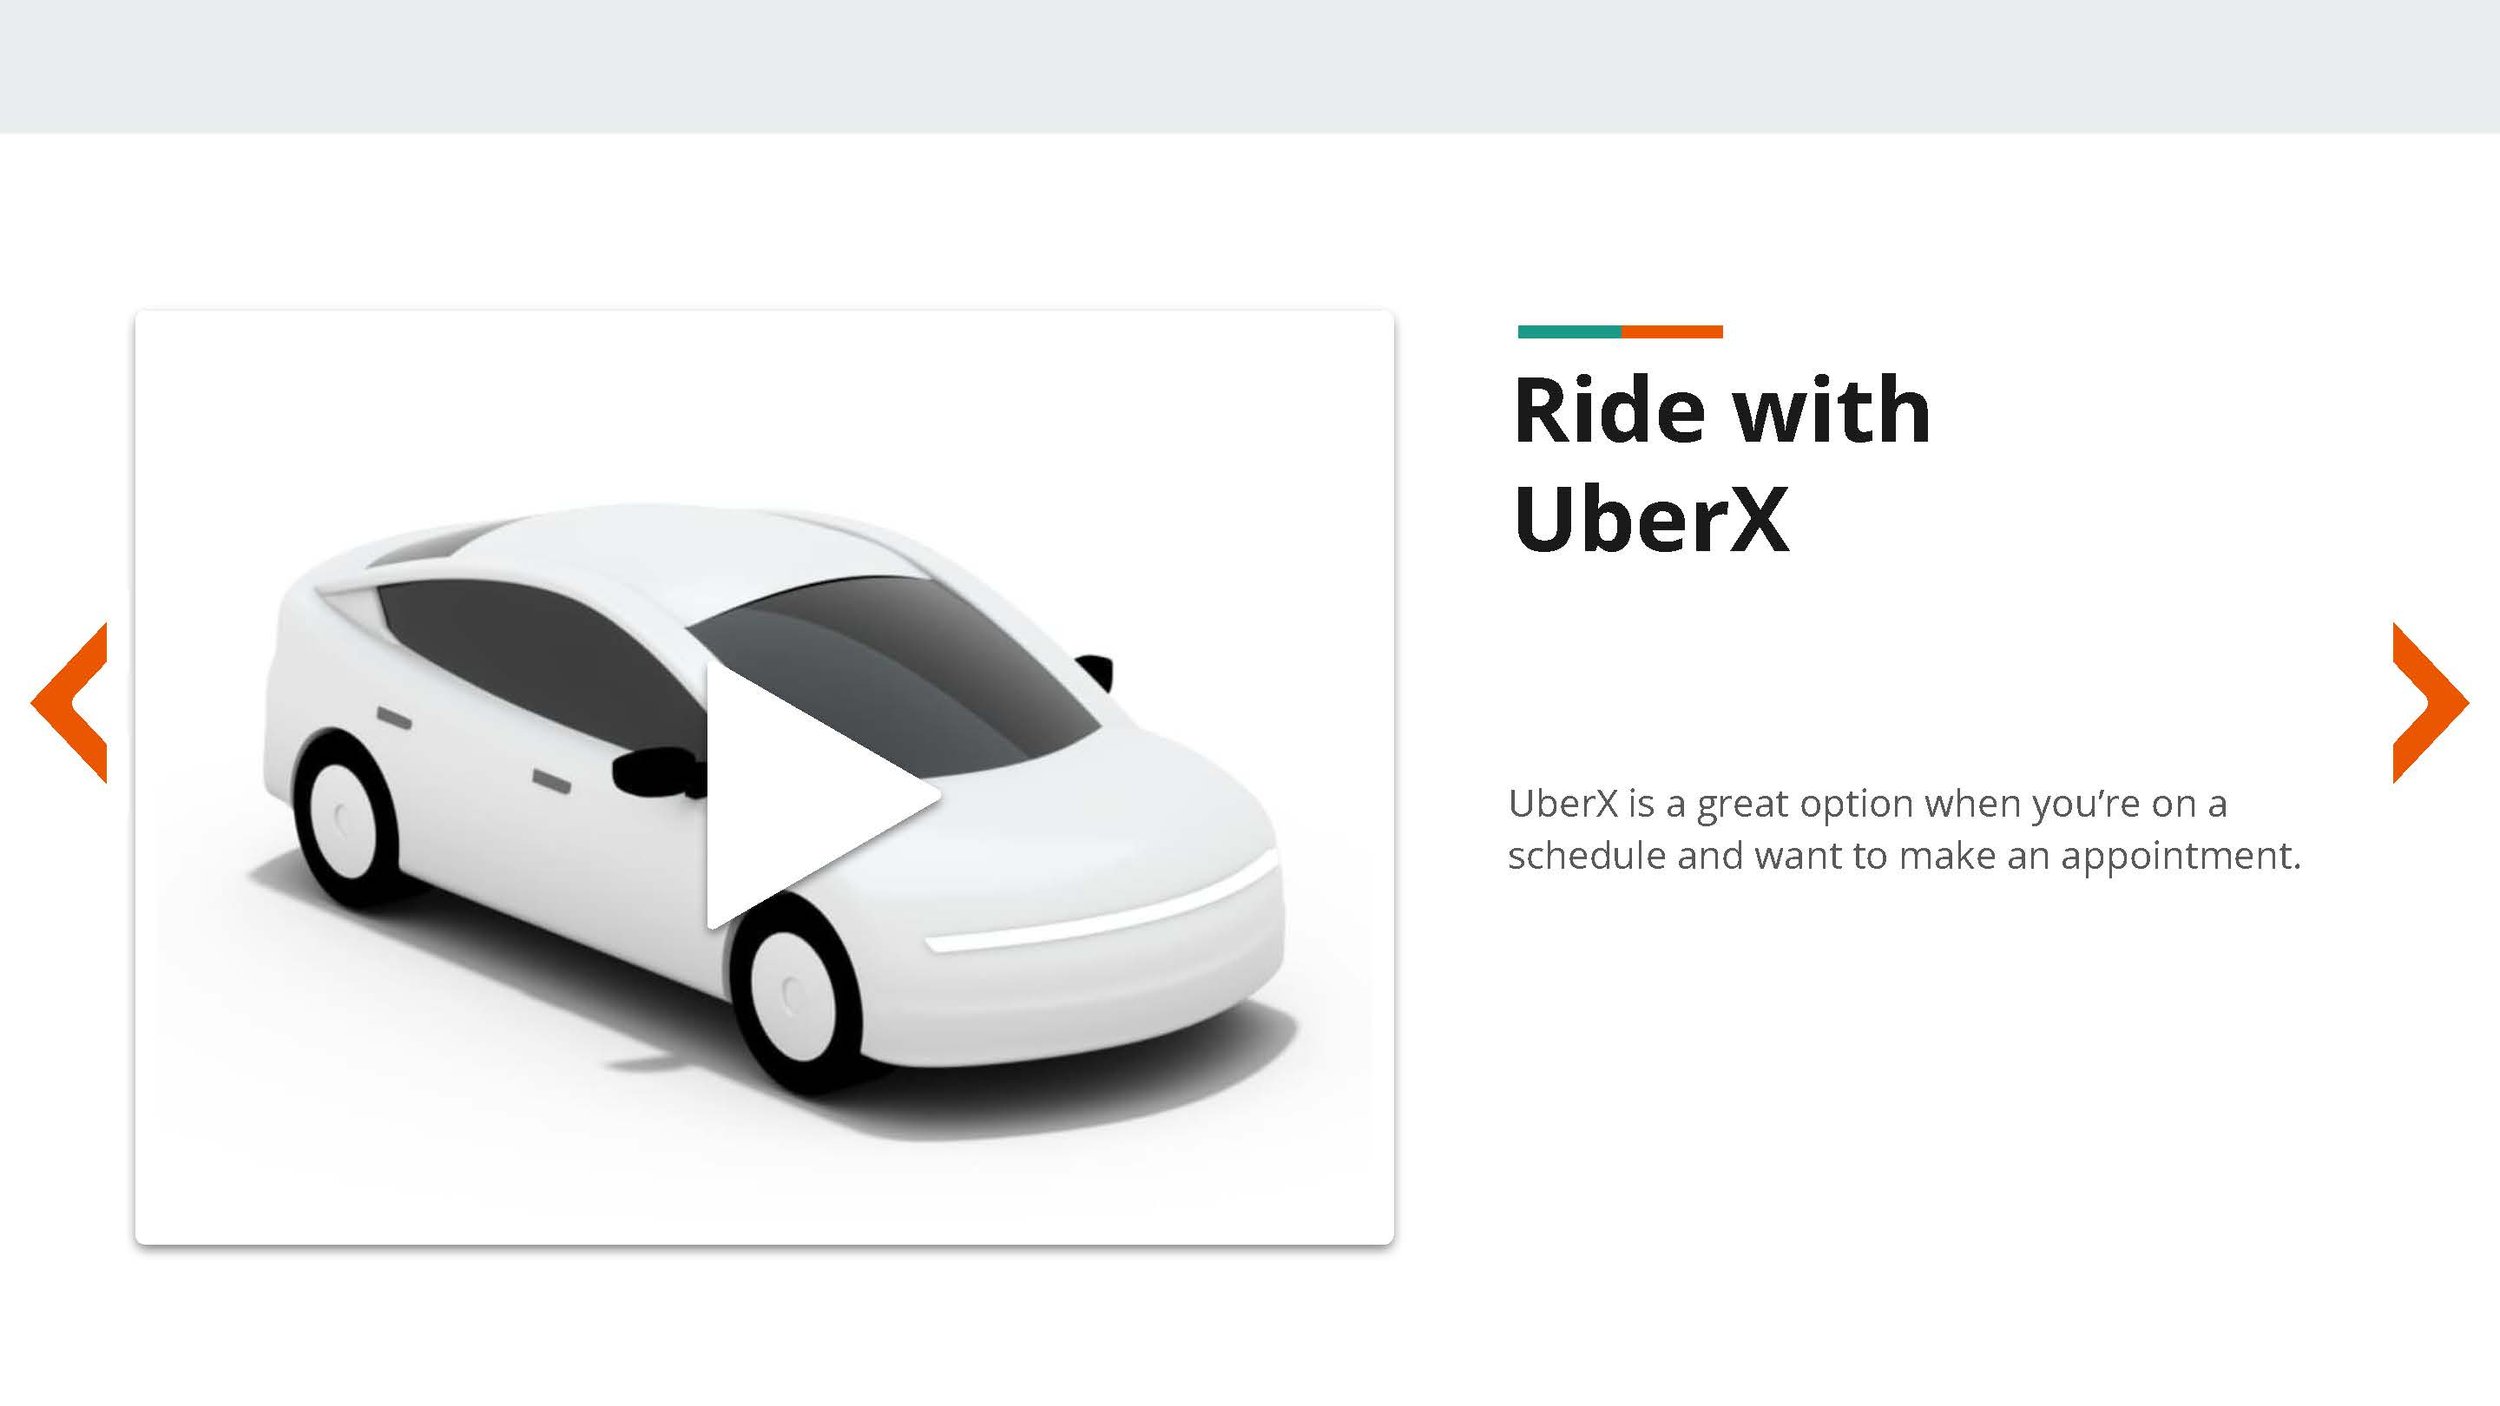 Uber Products & Services_ eLearning Prototype_Page_05.jpg